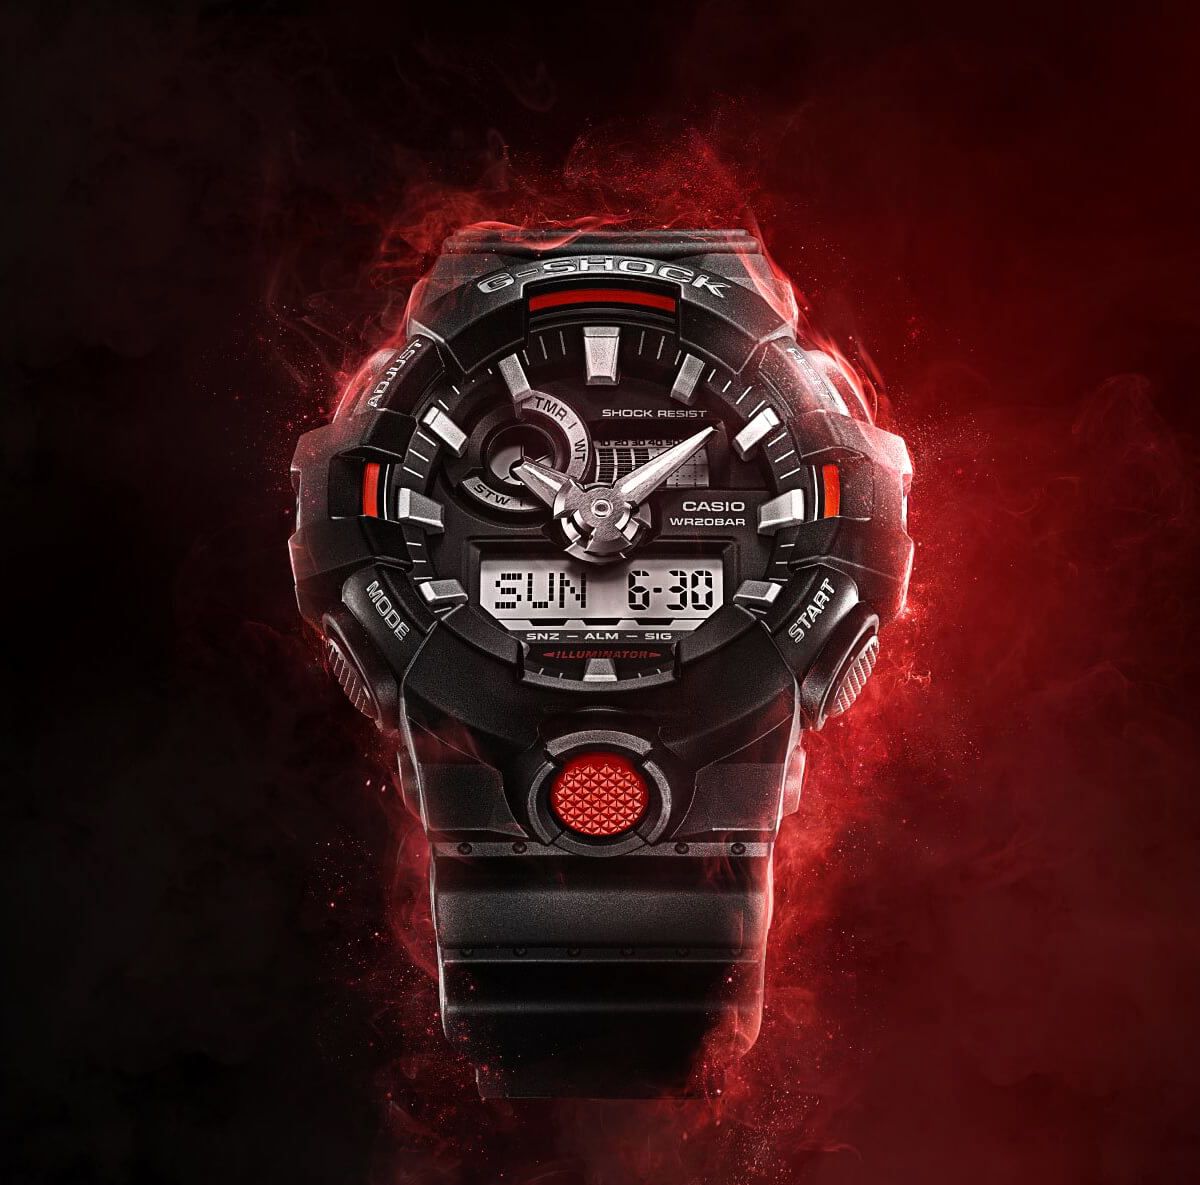 13 Best G-Shock Watches in 2023: Ultra-Tough Digital Timepieces